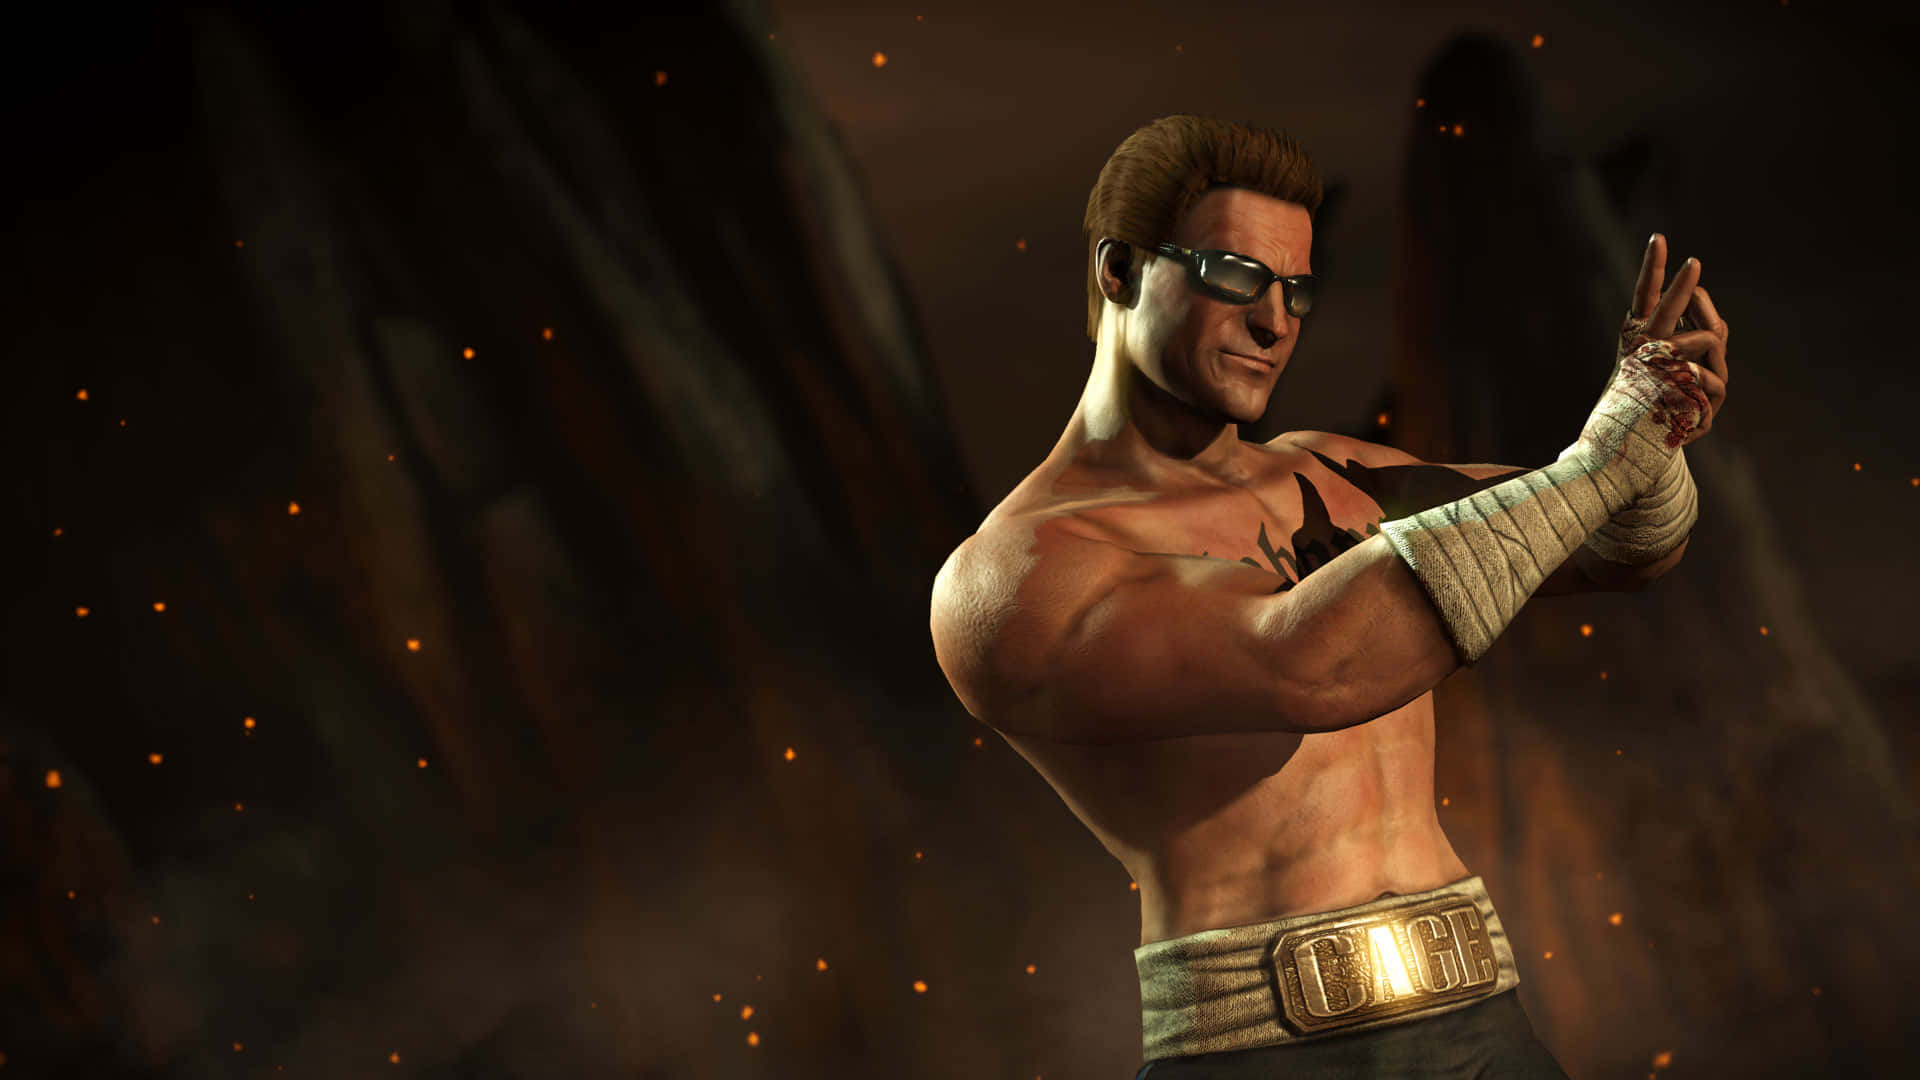 Johnny Cage leaning against a brick wall in a battle-ready pose Wallpaper